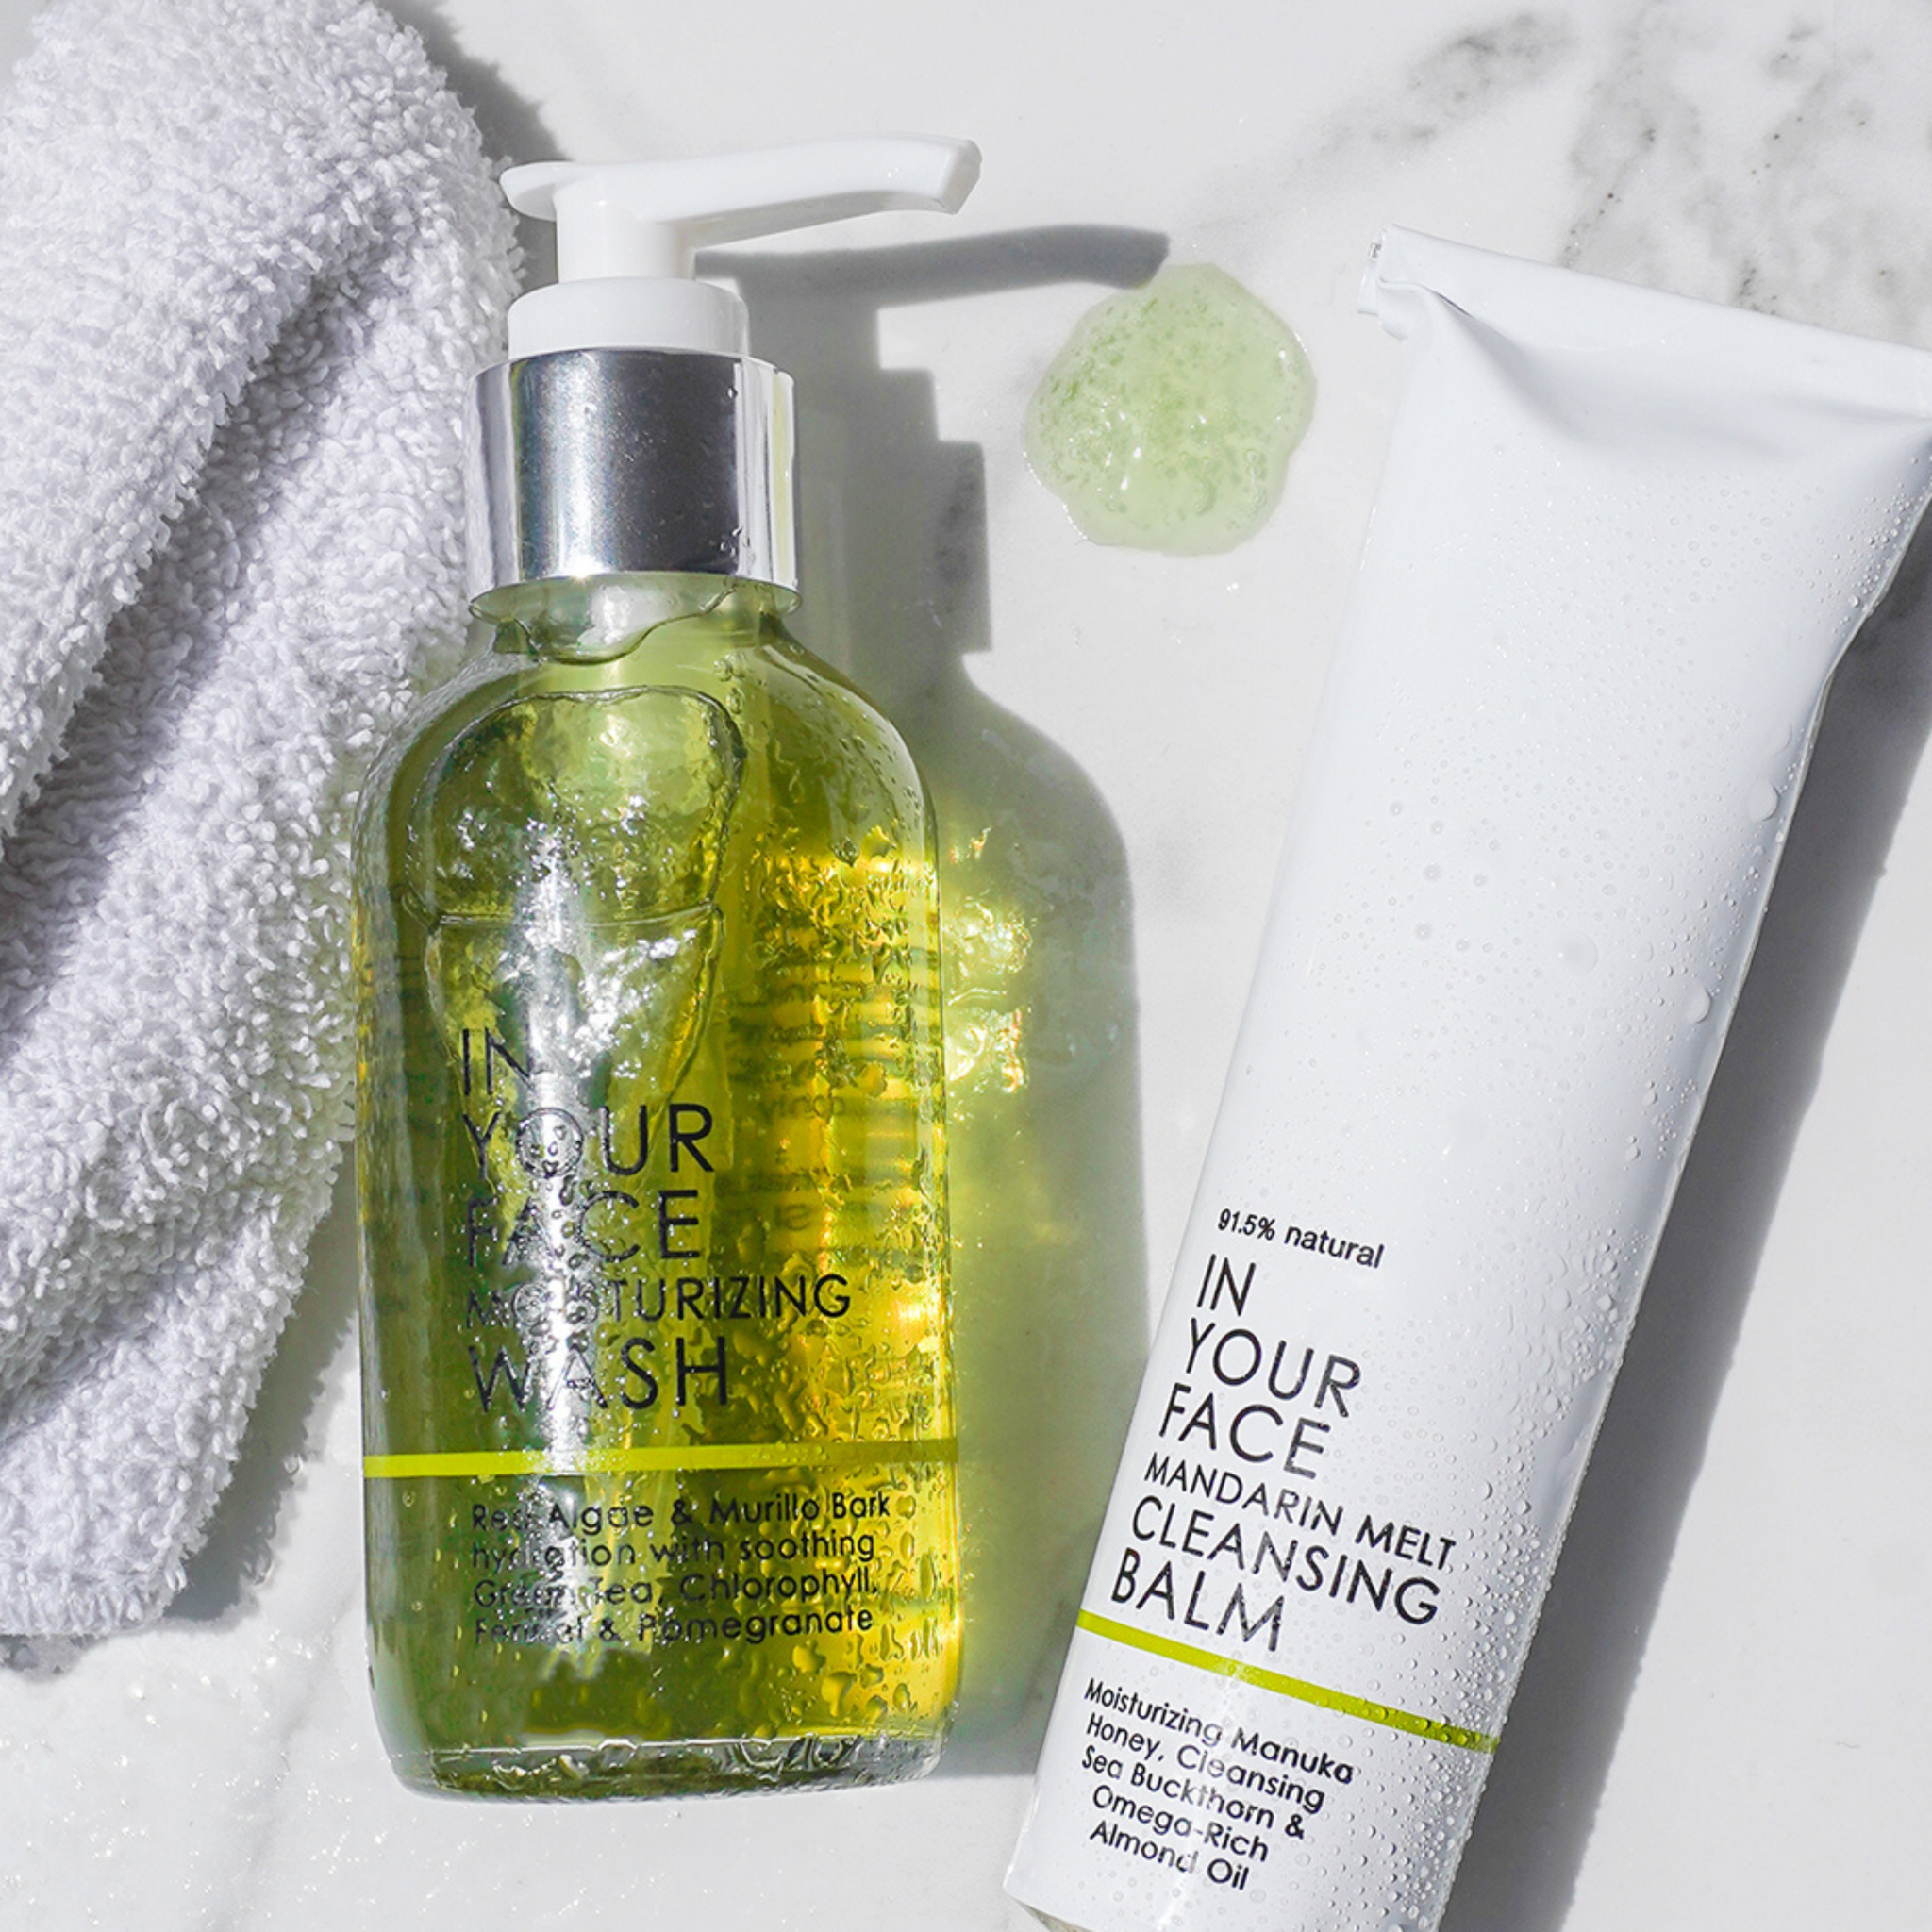 DIMINISH FINE LINES & WRINKLES WITH THE DOUBLE CLEANSE